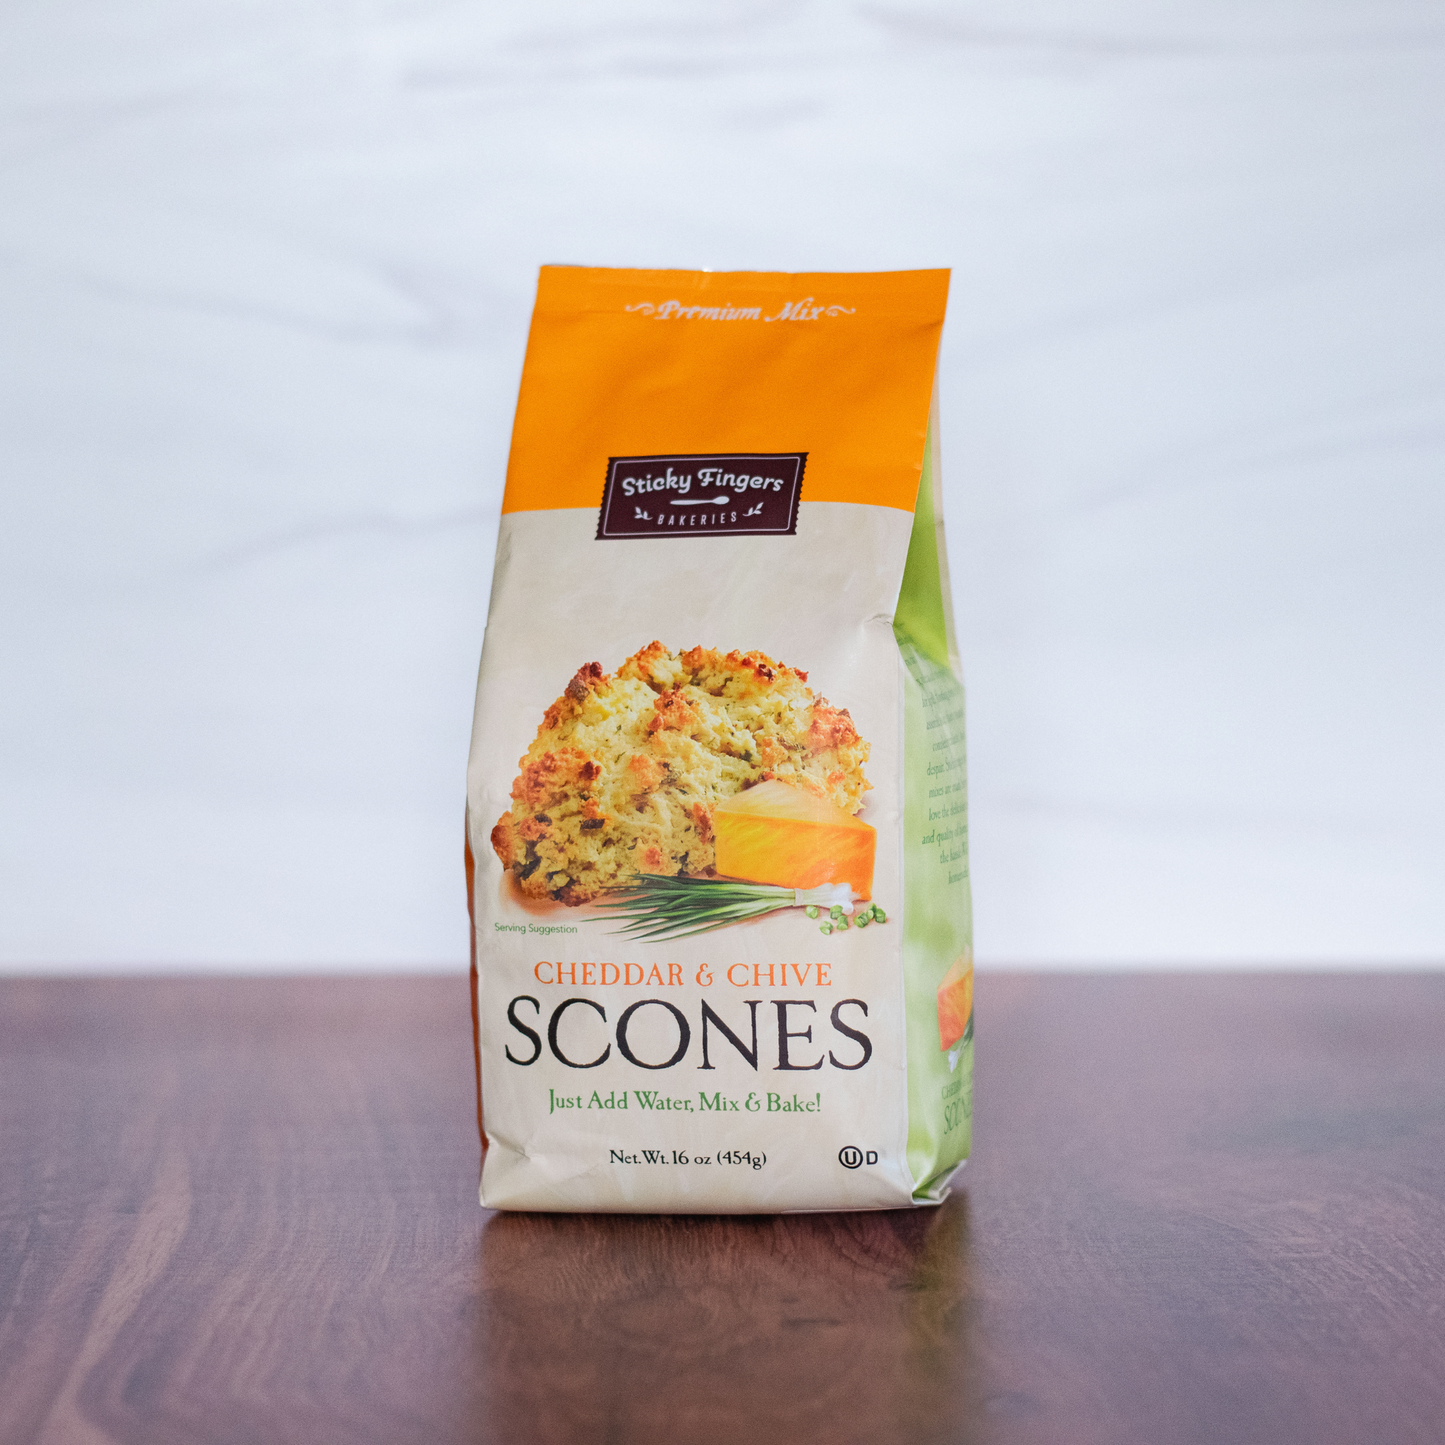 Cheddar & Chive Scone Mix